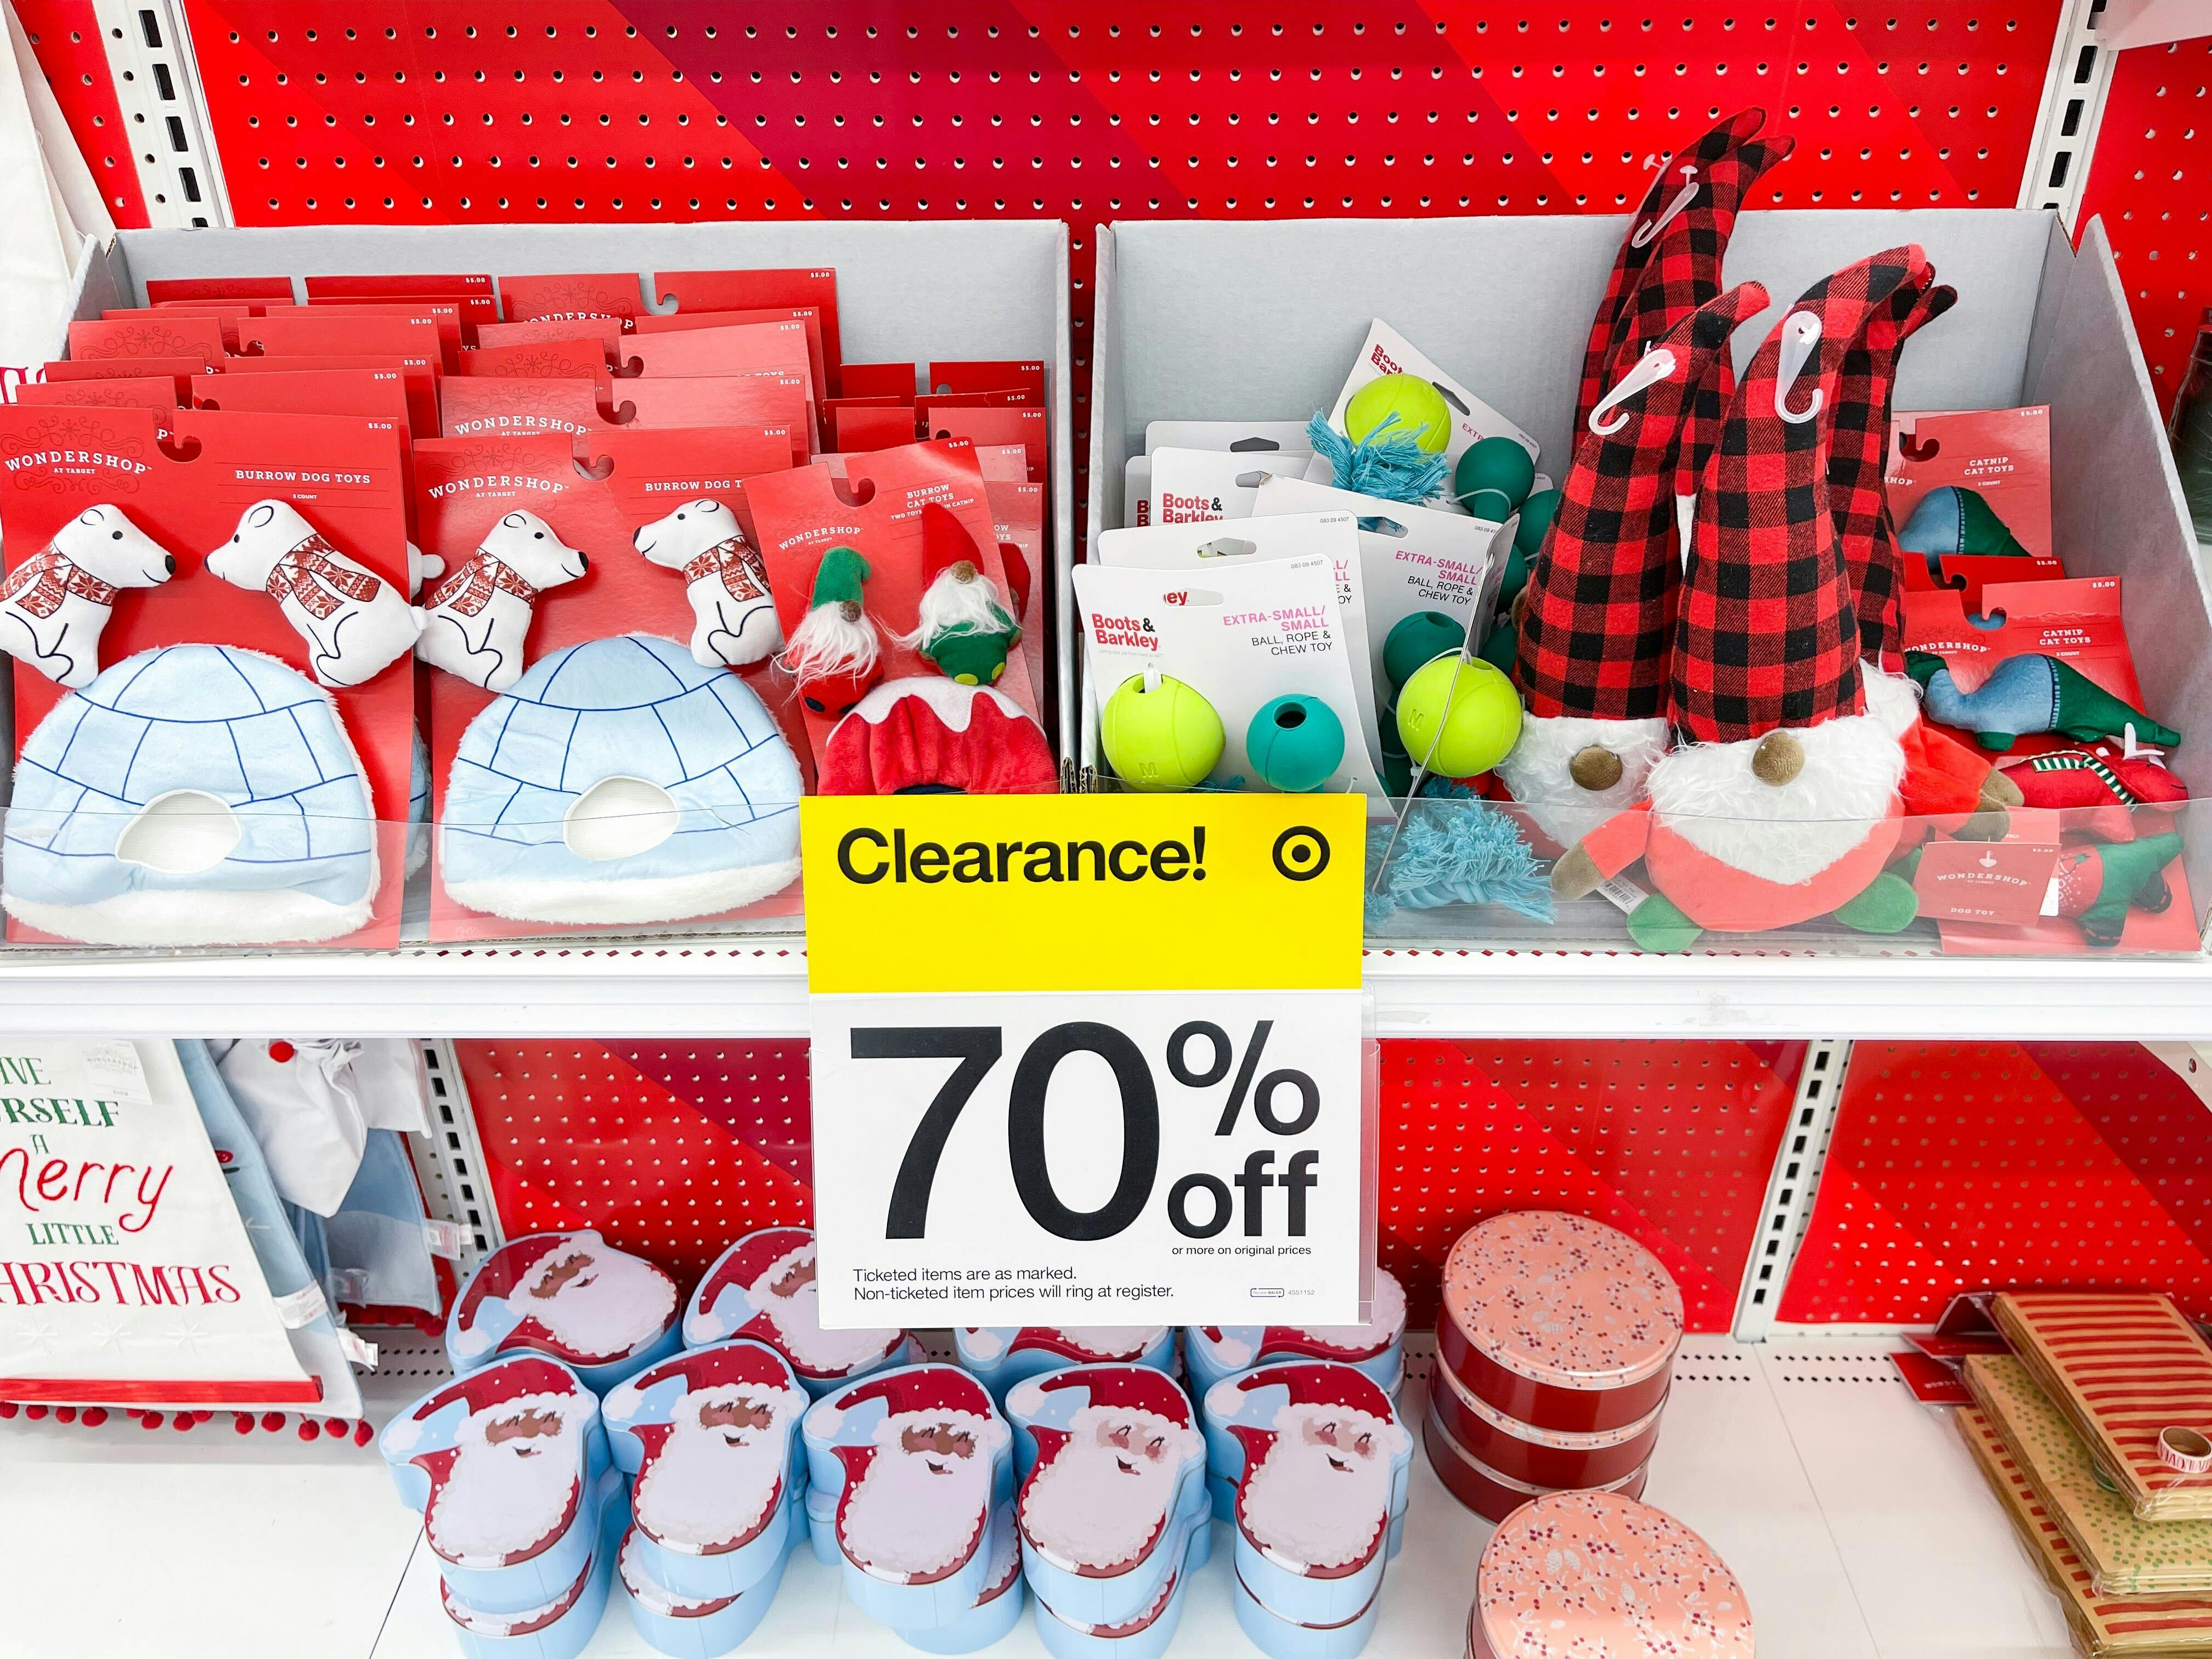 Christmas clearance on some shelves in Target with a sign showing them to be 70% off